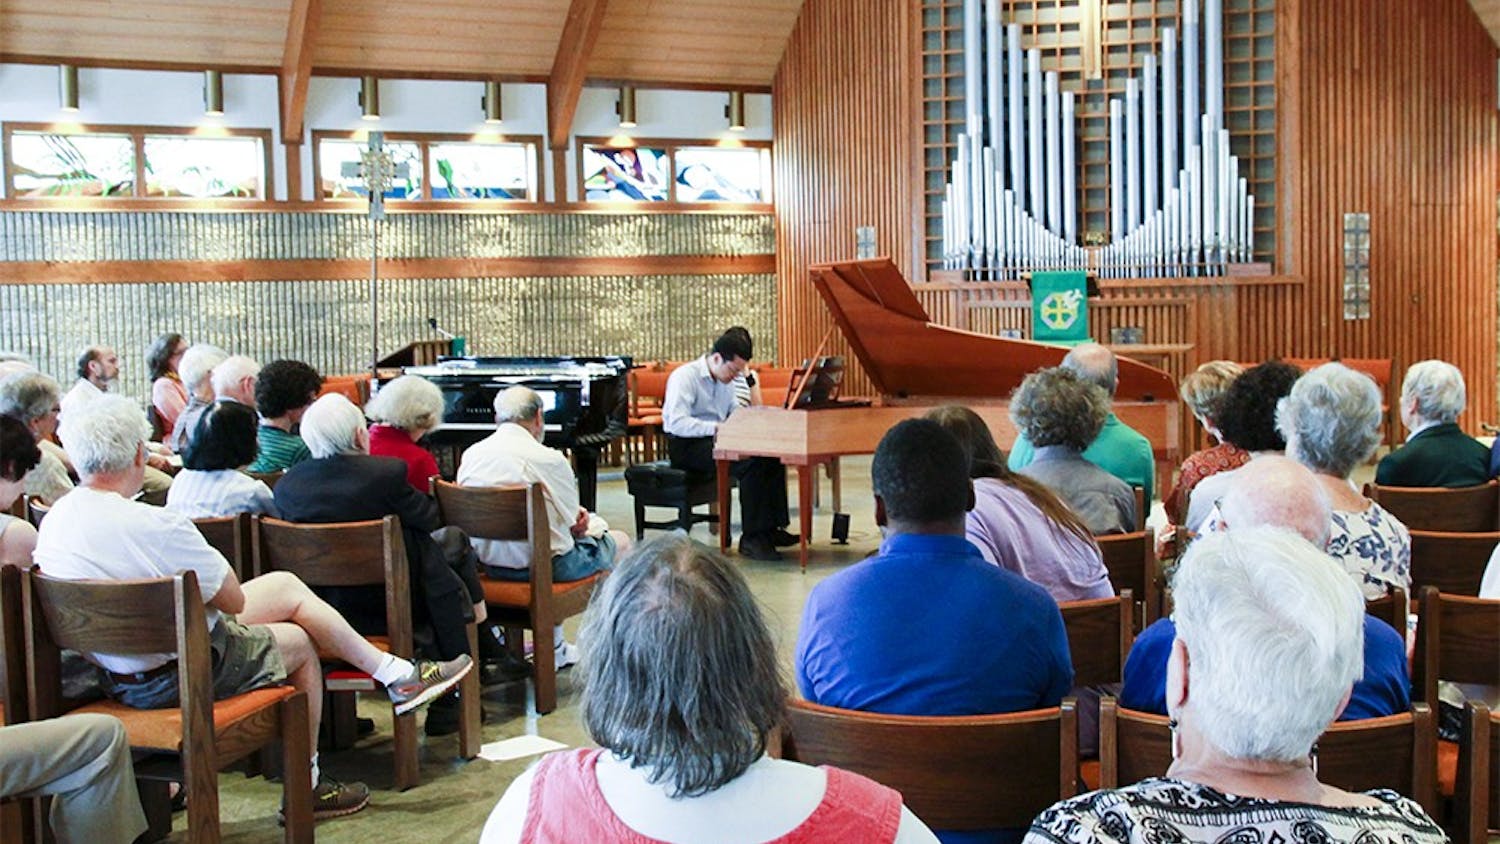 Mike Lee performs on Sunday at the St. Thomas Lutheran Church. This performance was part of the Bloomington Early Music Festival that happened between May 25-29.